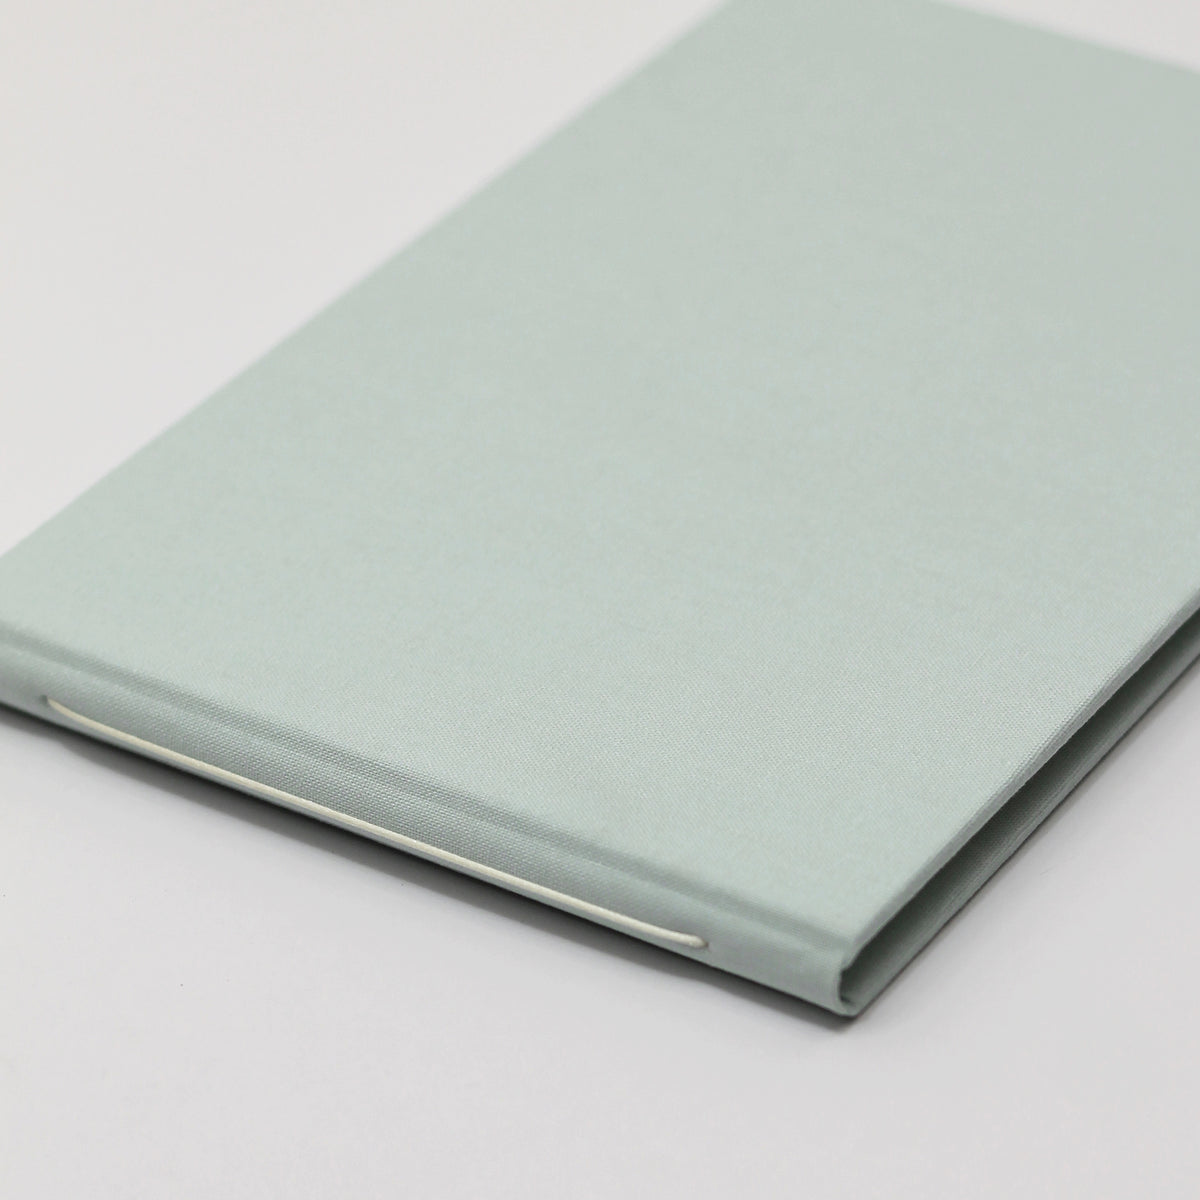 Classic Guestbook | Cover: Pastel Blue Cotton | Available Personalized